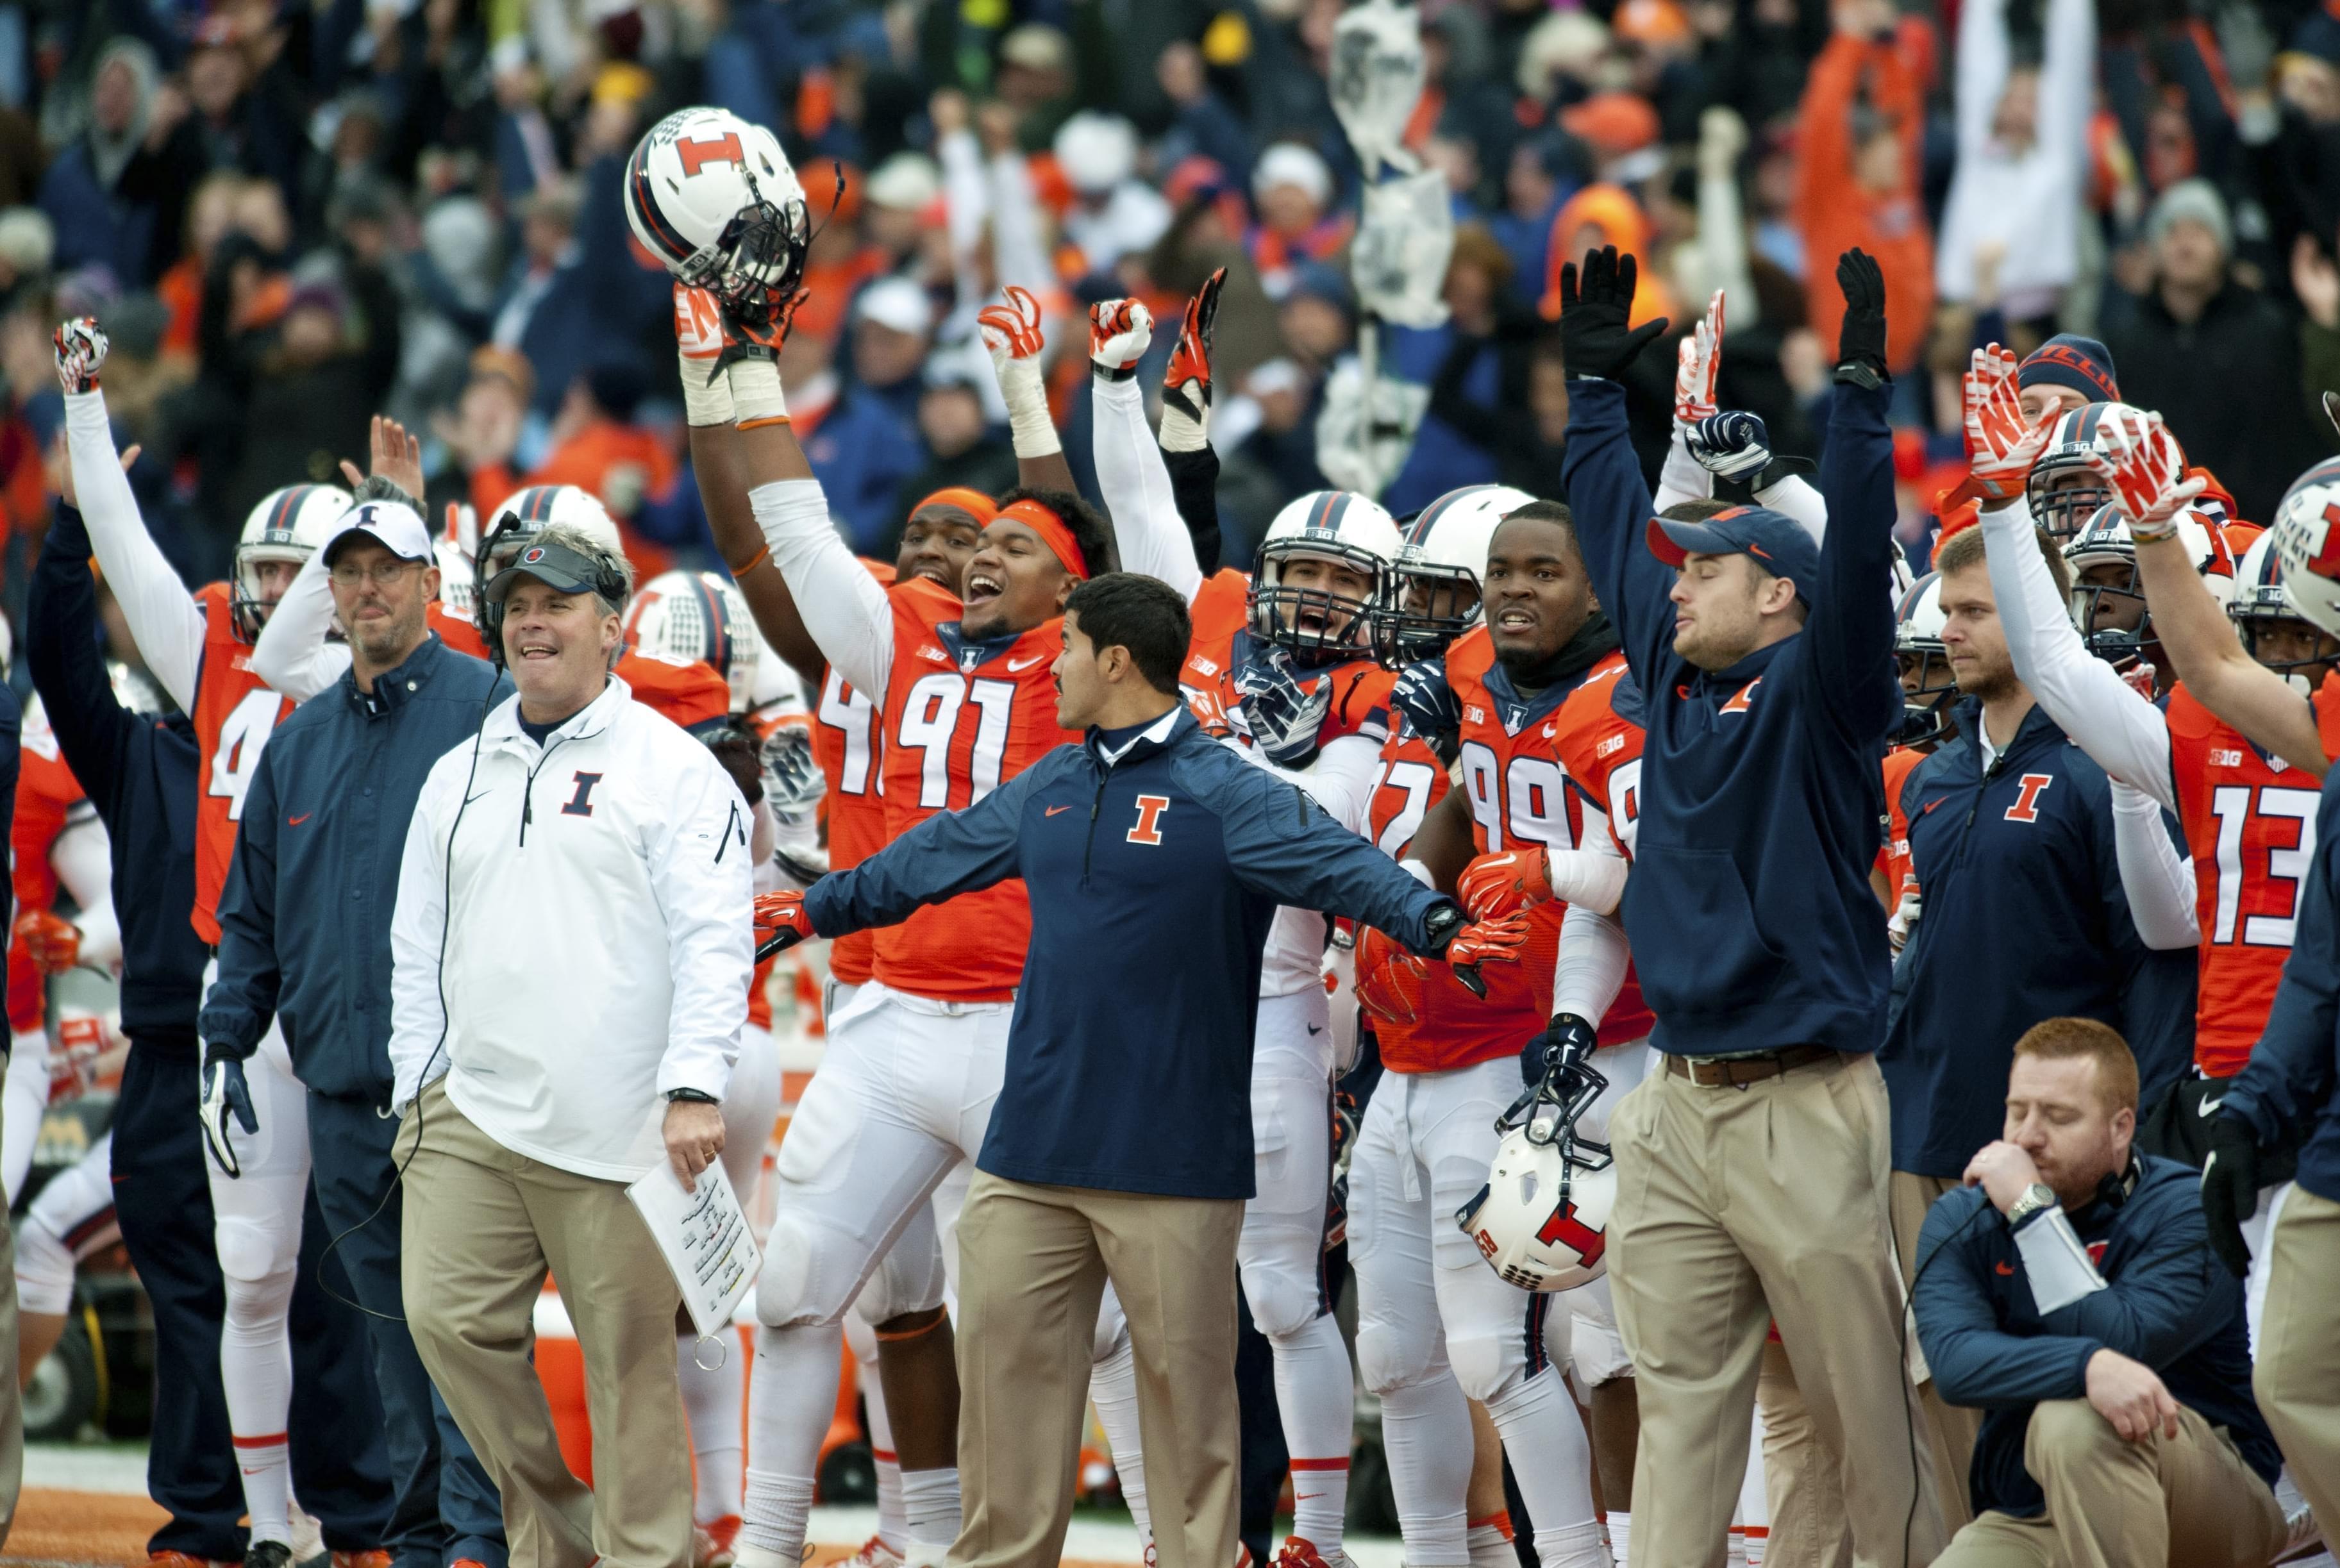 Illinois sideline reacts after David Reisner's game-winning field goal Saturday to defeat Penn State 16 to 14.